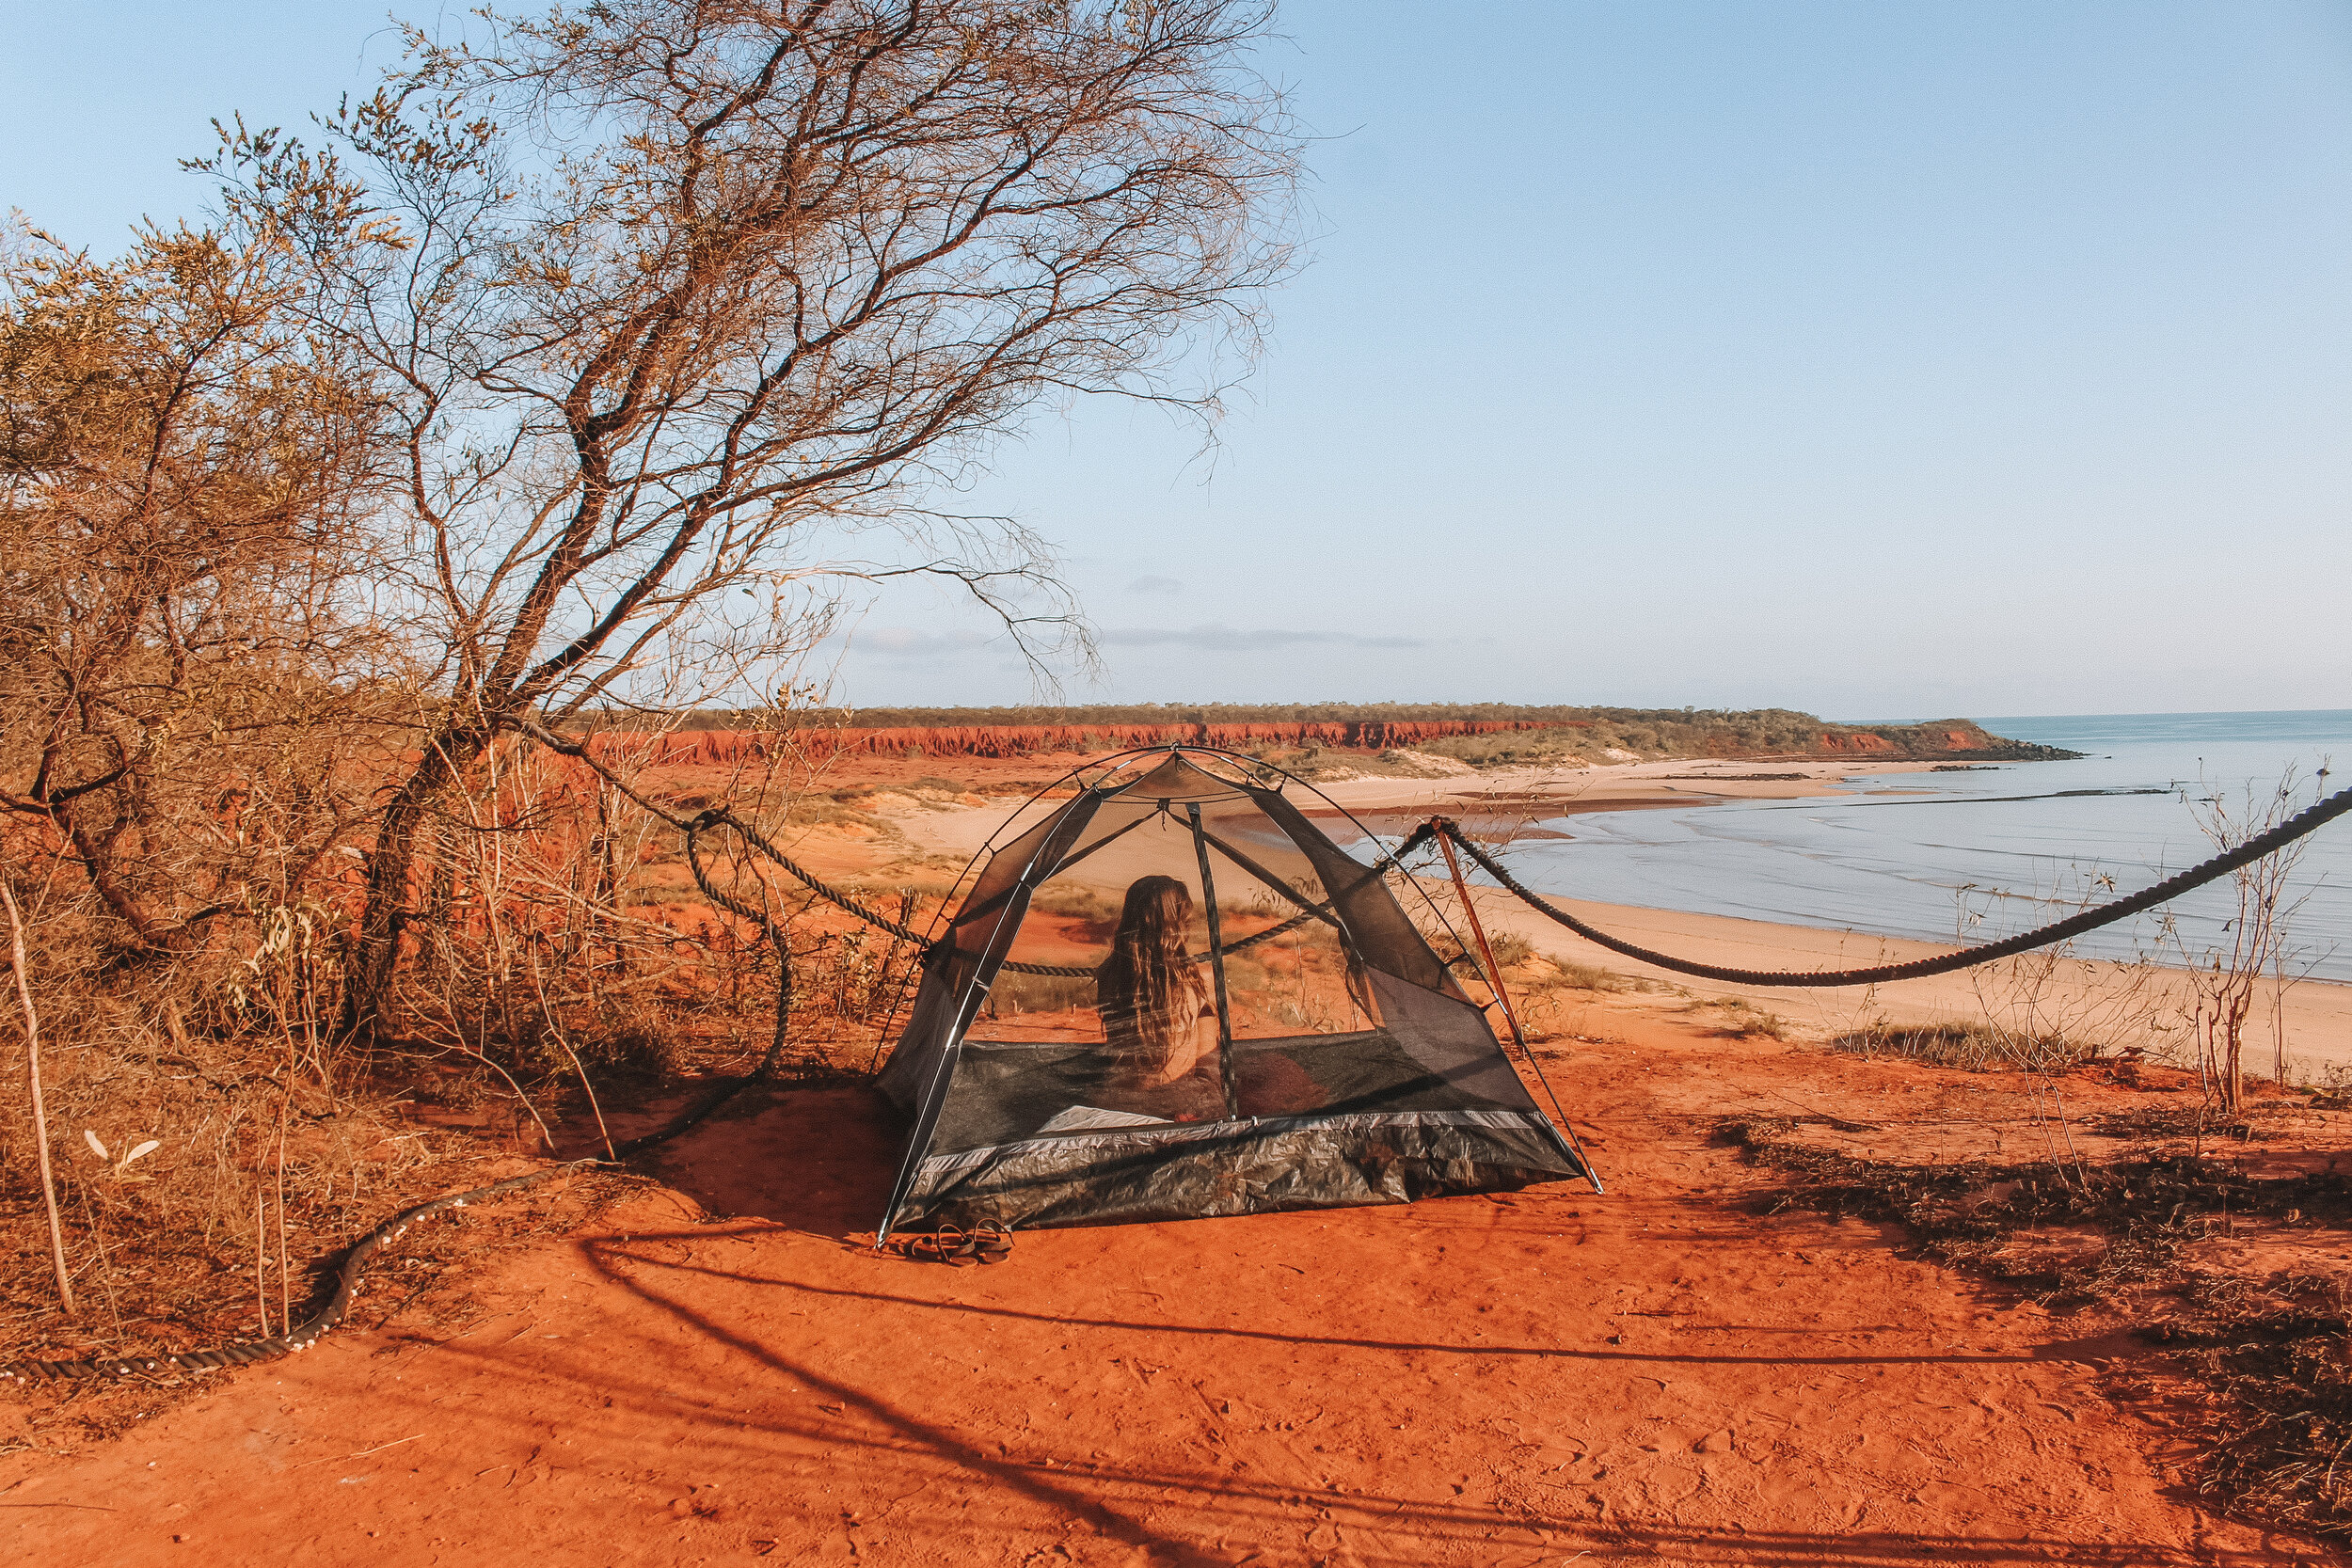  The Kimberley, Australia   7 beaut places to camp on the Dampier Peninsula    Read here  